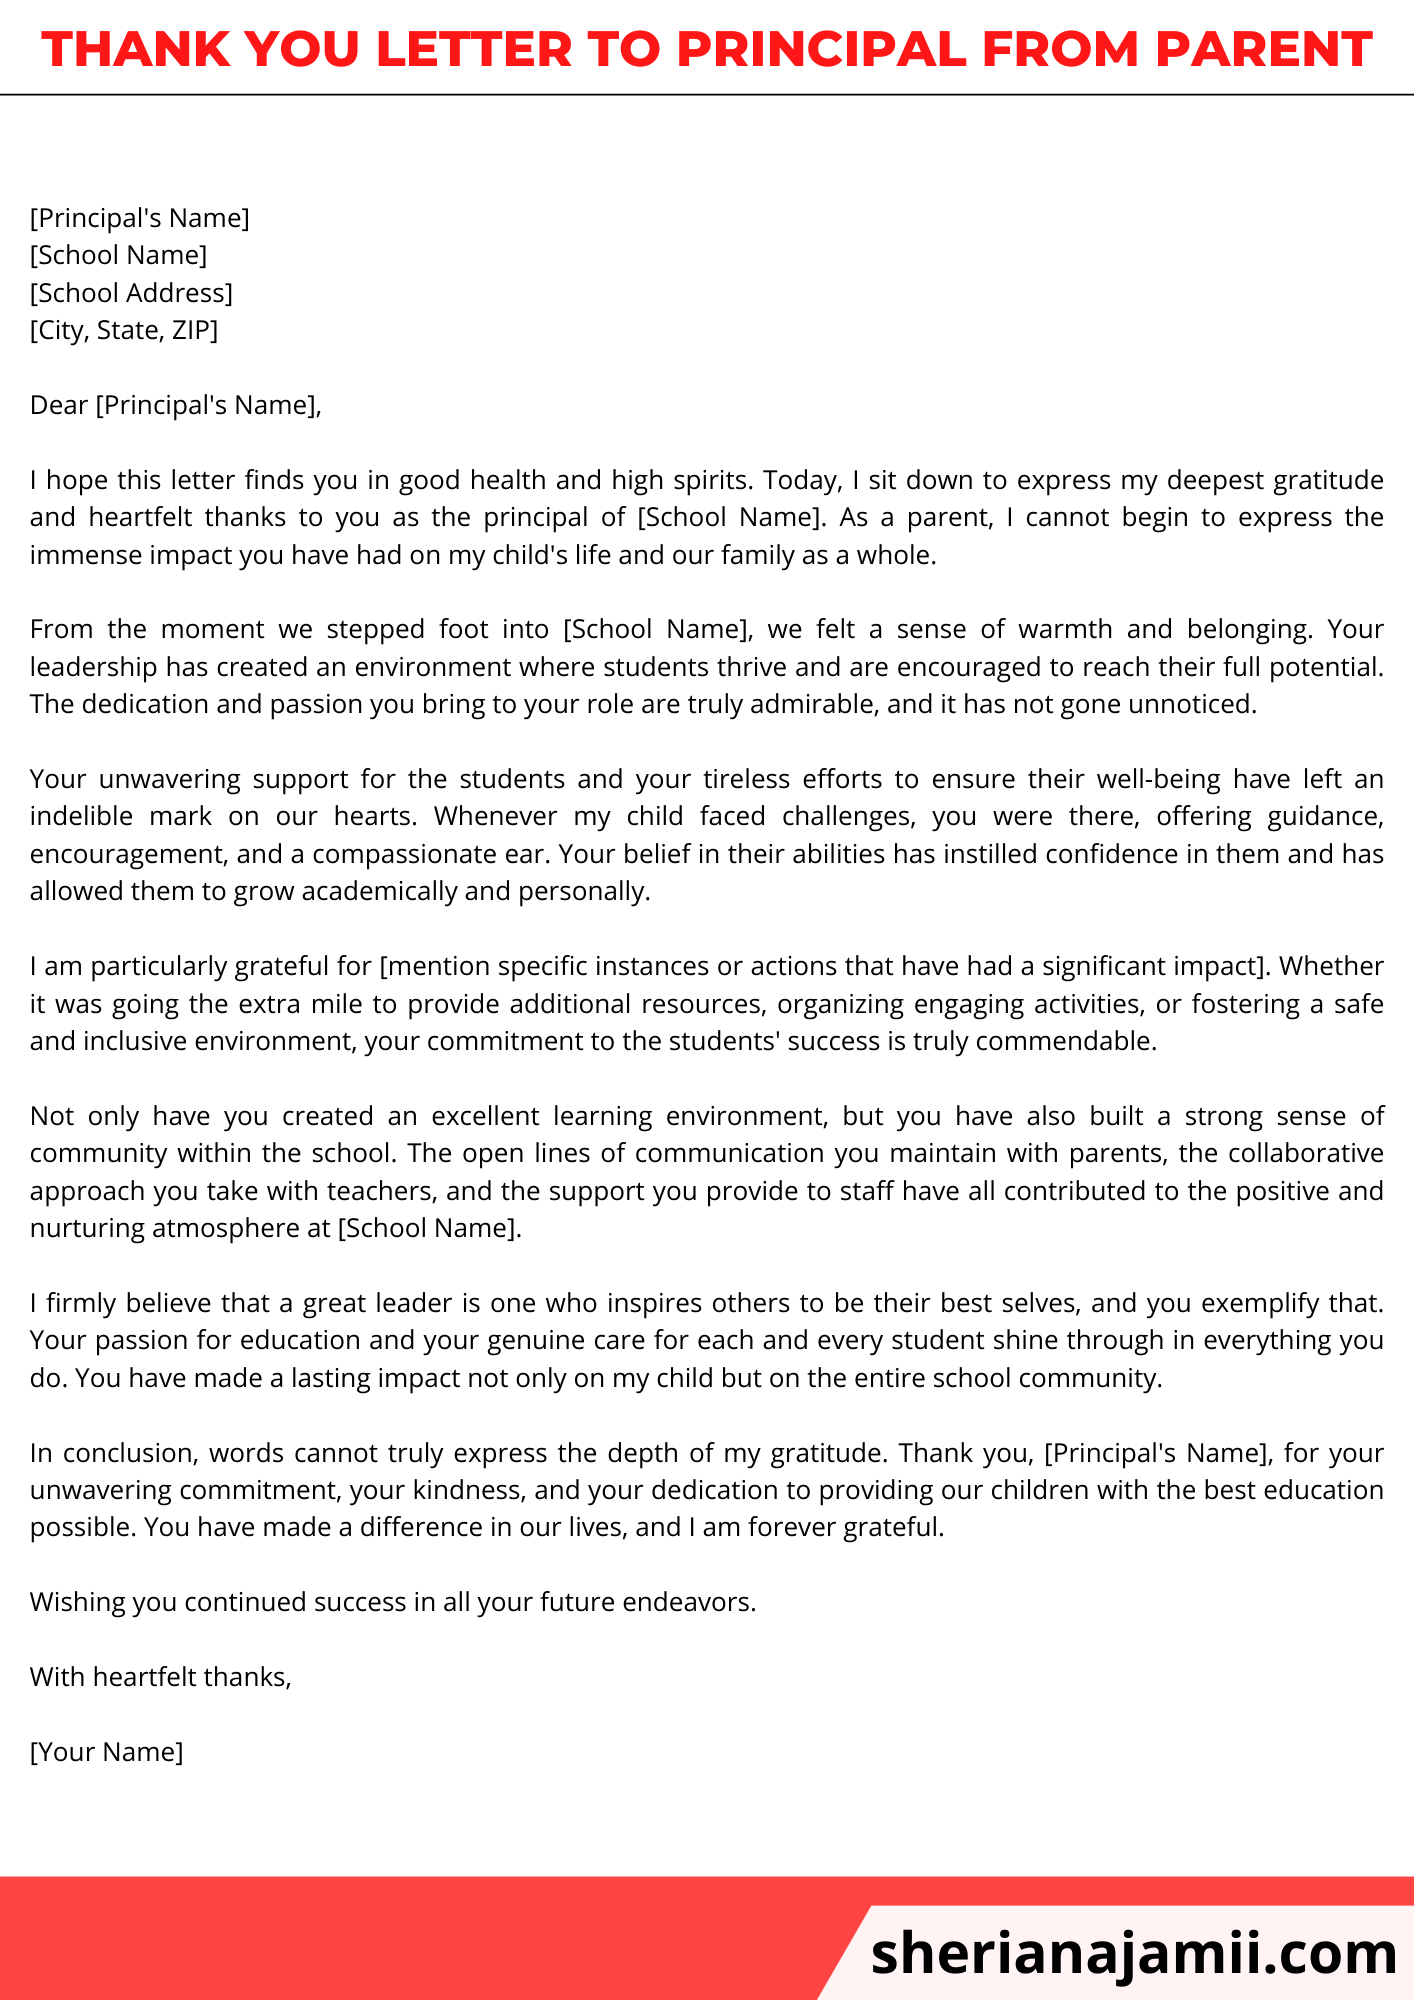 thank you letter to principal from parent